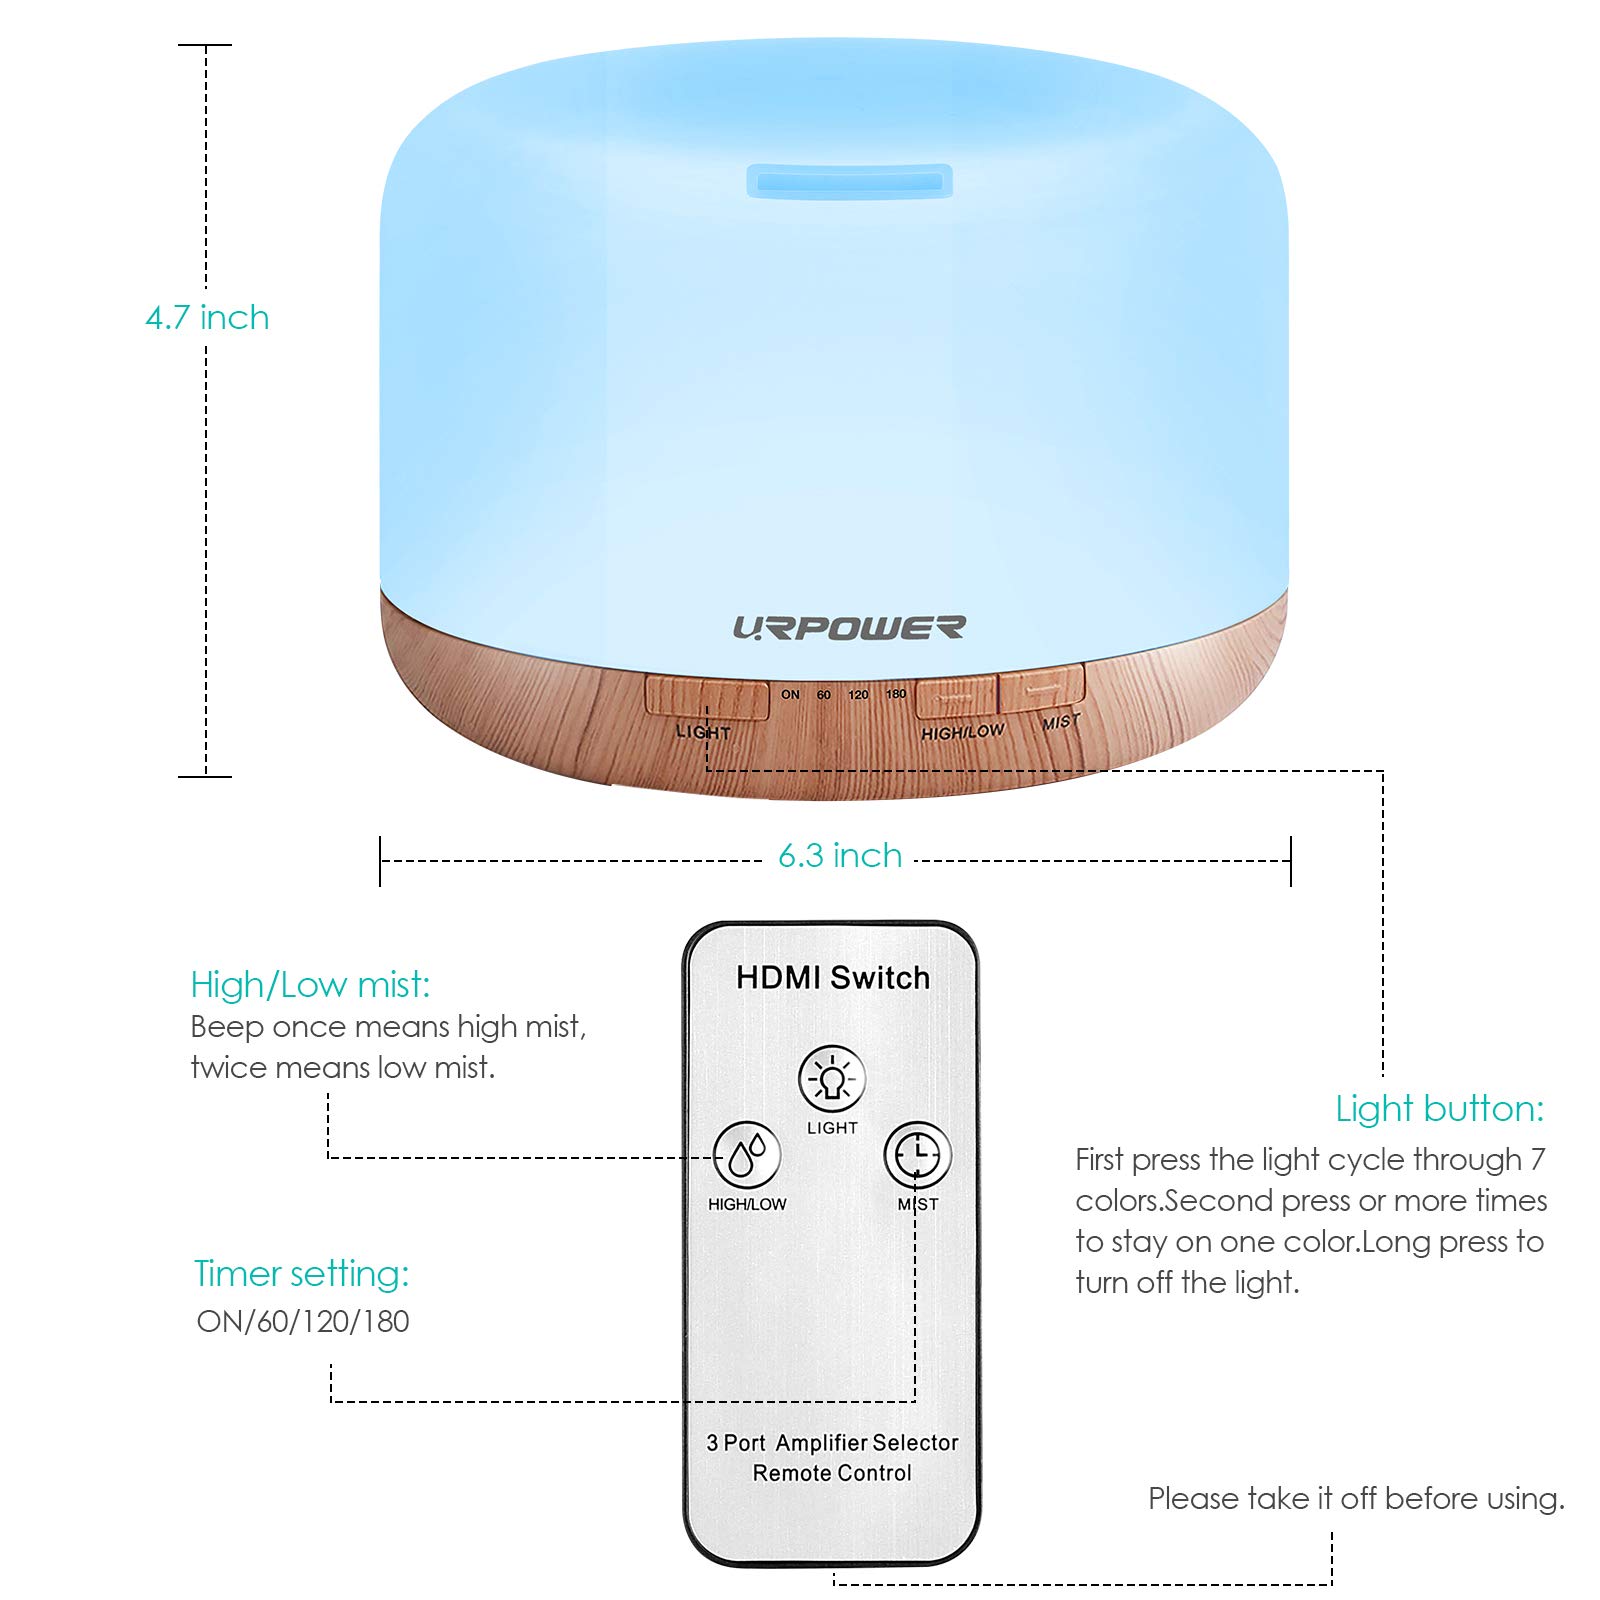 URPOWER 500ml Aromatherapy Essential Oil Diffuser Humidifier Diffusers for Essential Oils Room Decor Lighting with 4 Timer Settings, 7 Color Changing Lamps and Waterless Auto Shut-Off